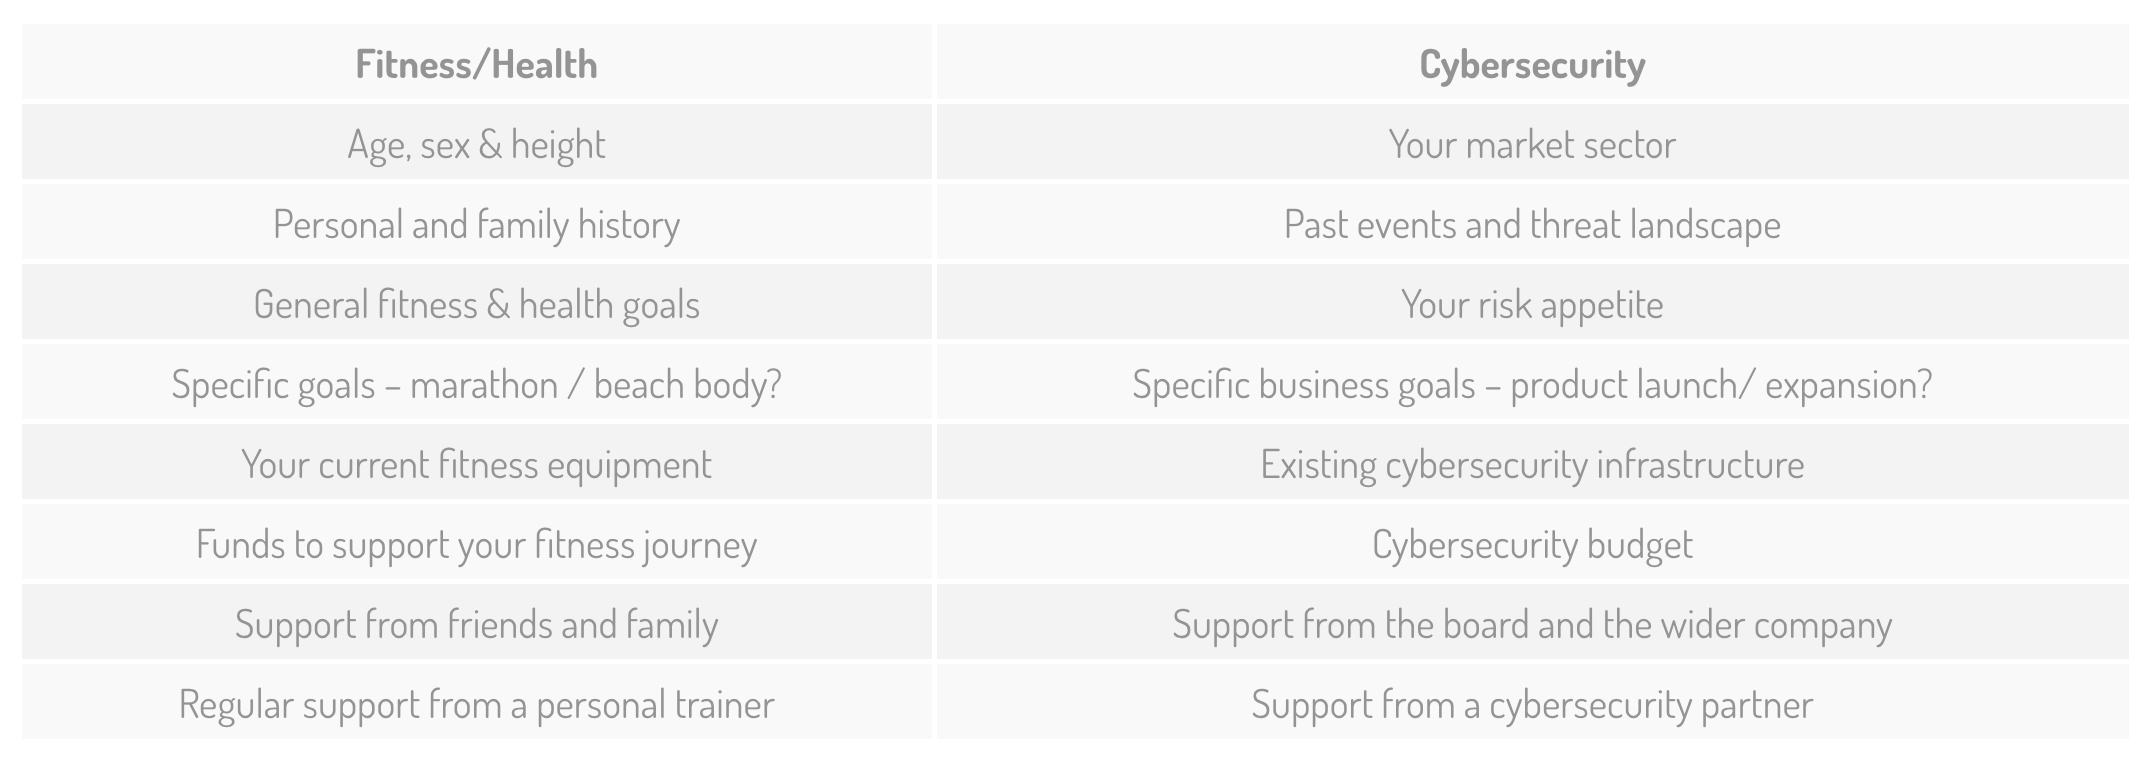 Comparison of the various lifecycle stages between fitness and cybersecurity